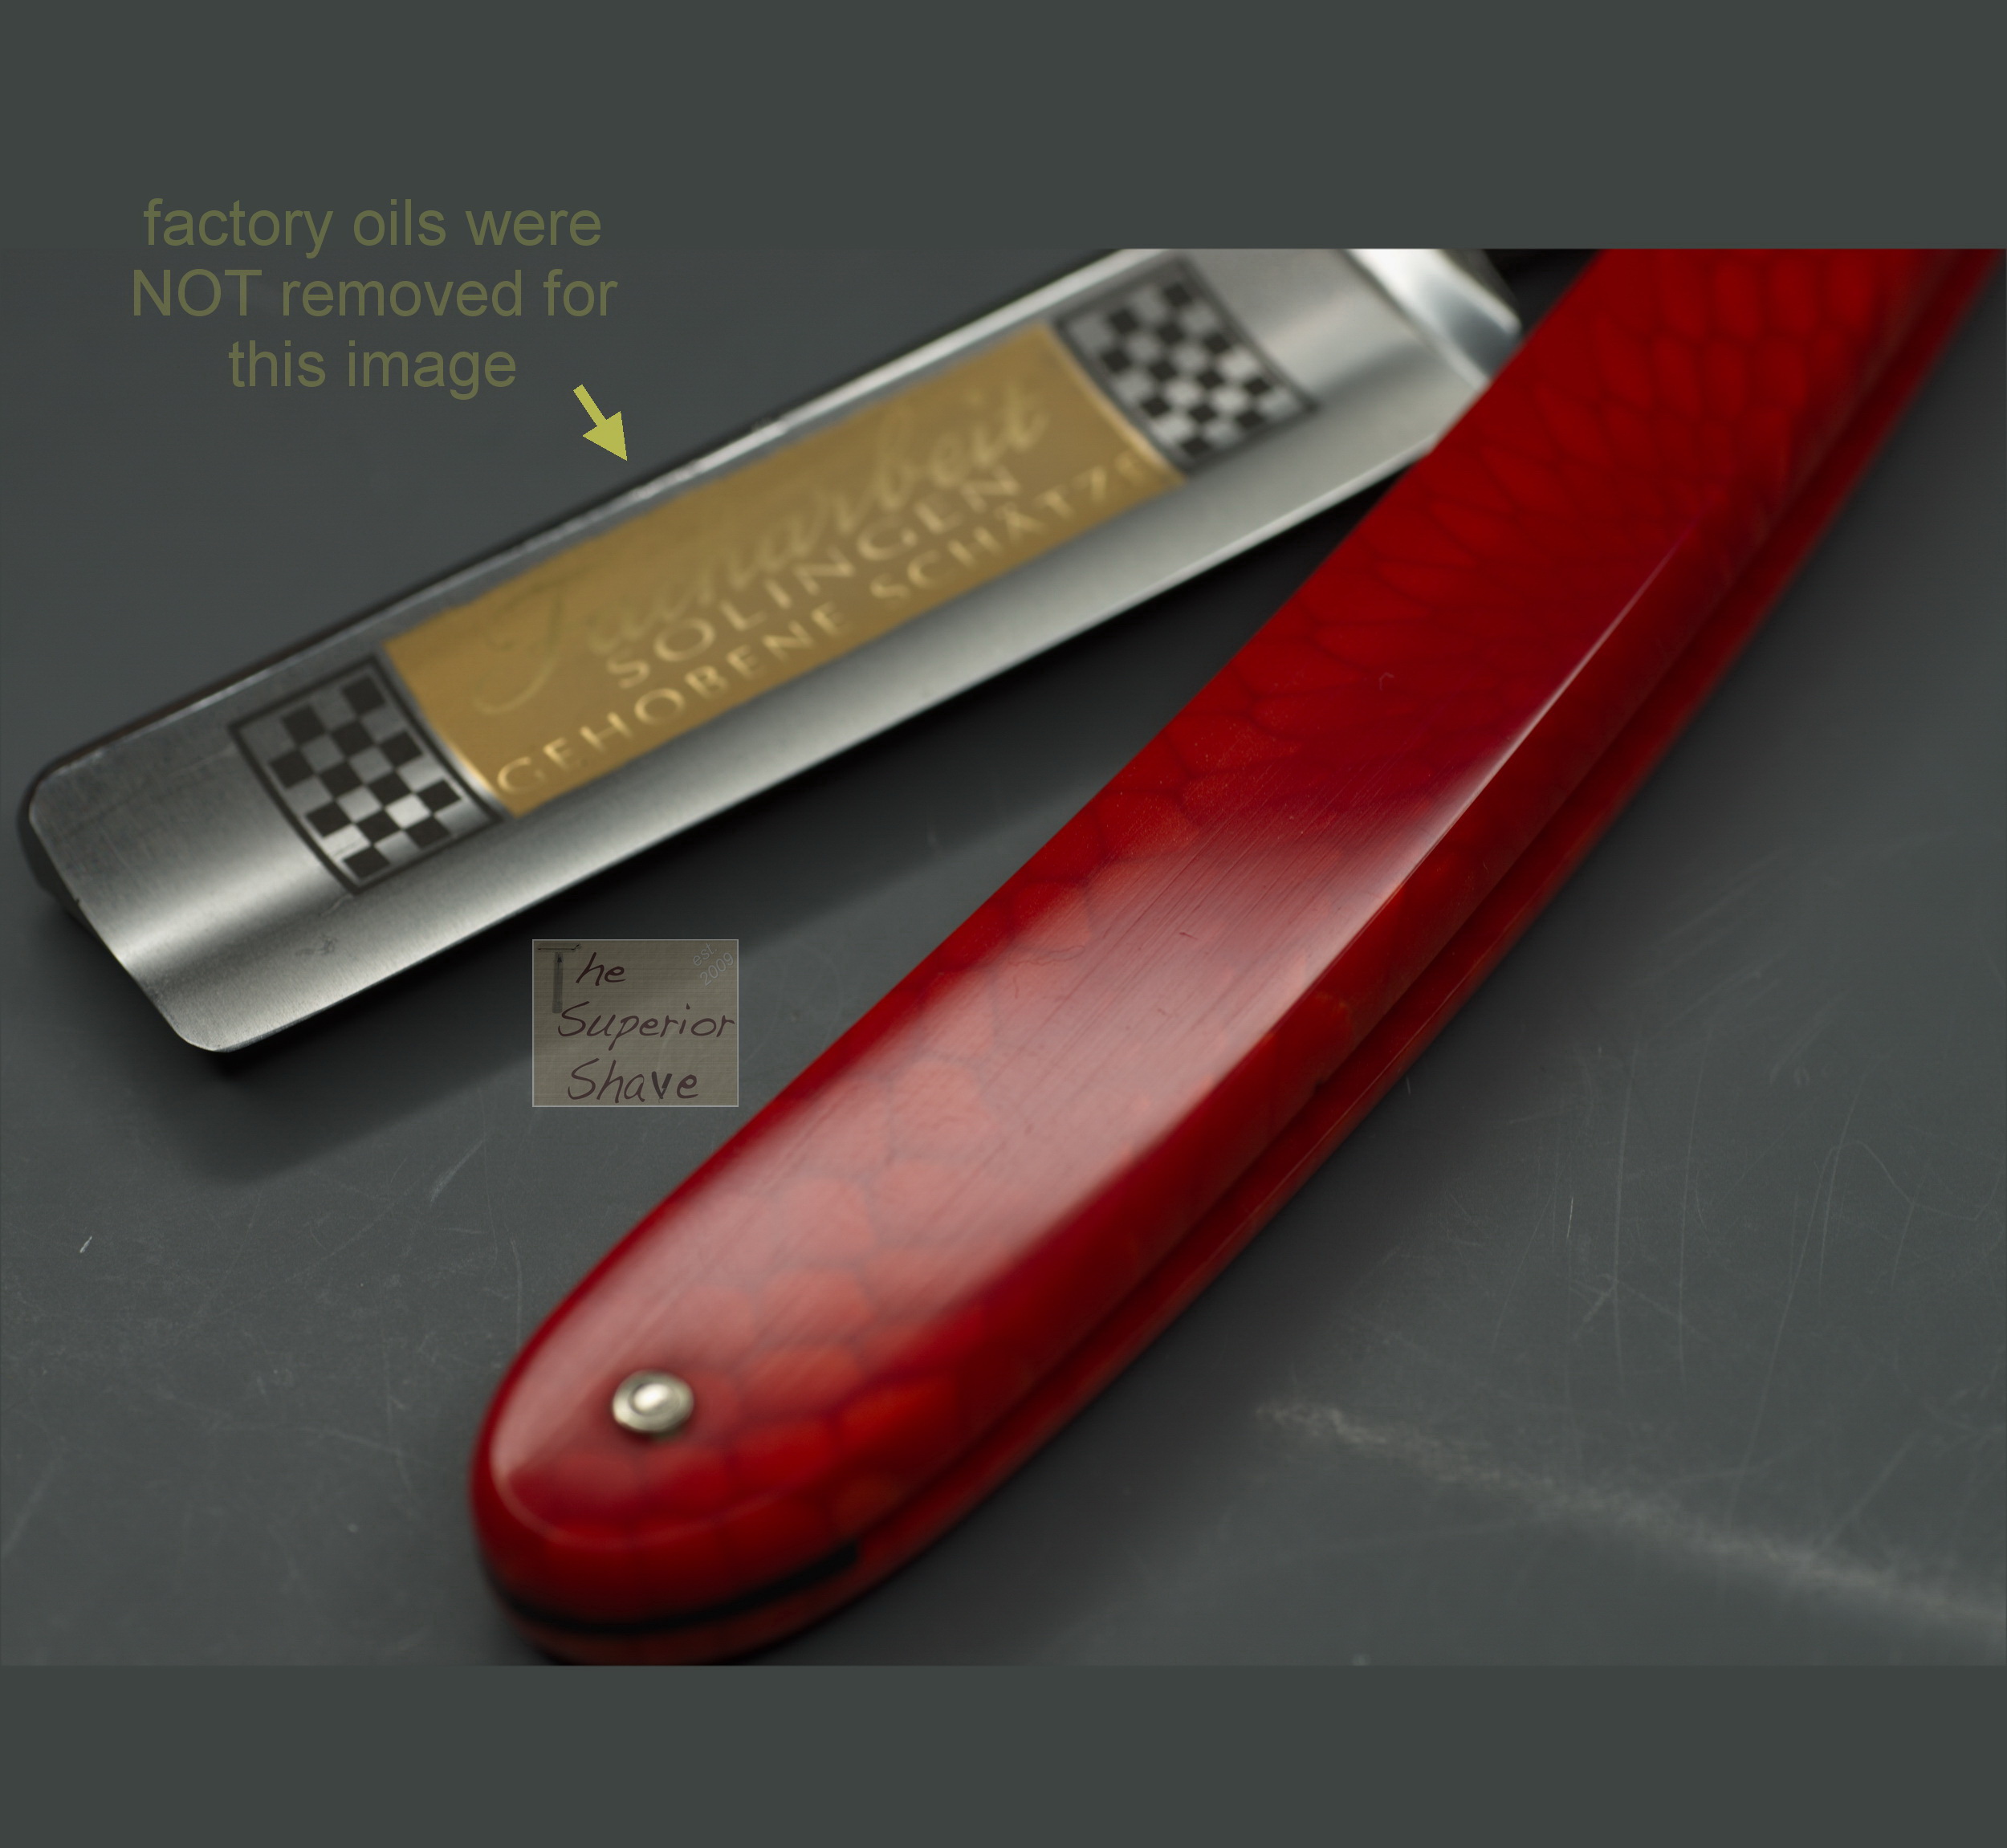 Square HISTORIC Ground | | 1967-1971 Steel Full Germany | Made in Acrylic Straight German 6/8 | Red Handle, Look Dovo Point Size | Reptile Facharbeit Stainless Hollow 136813315 Razor | |